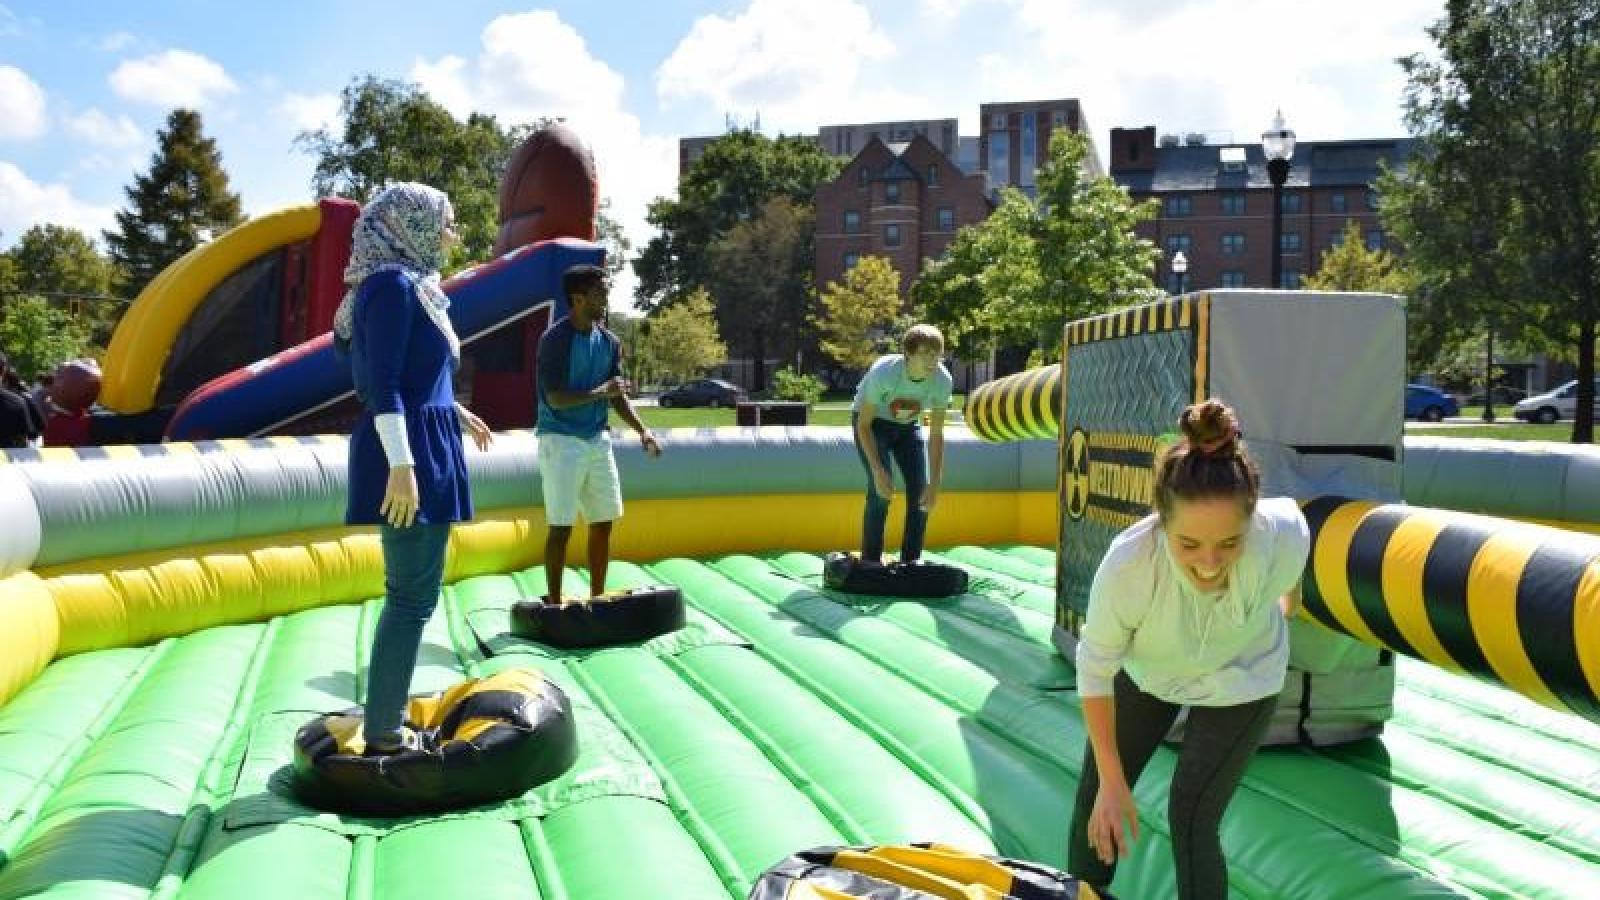 Students playing a game on the inflatable at field day 